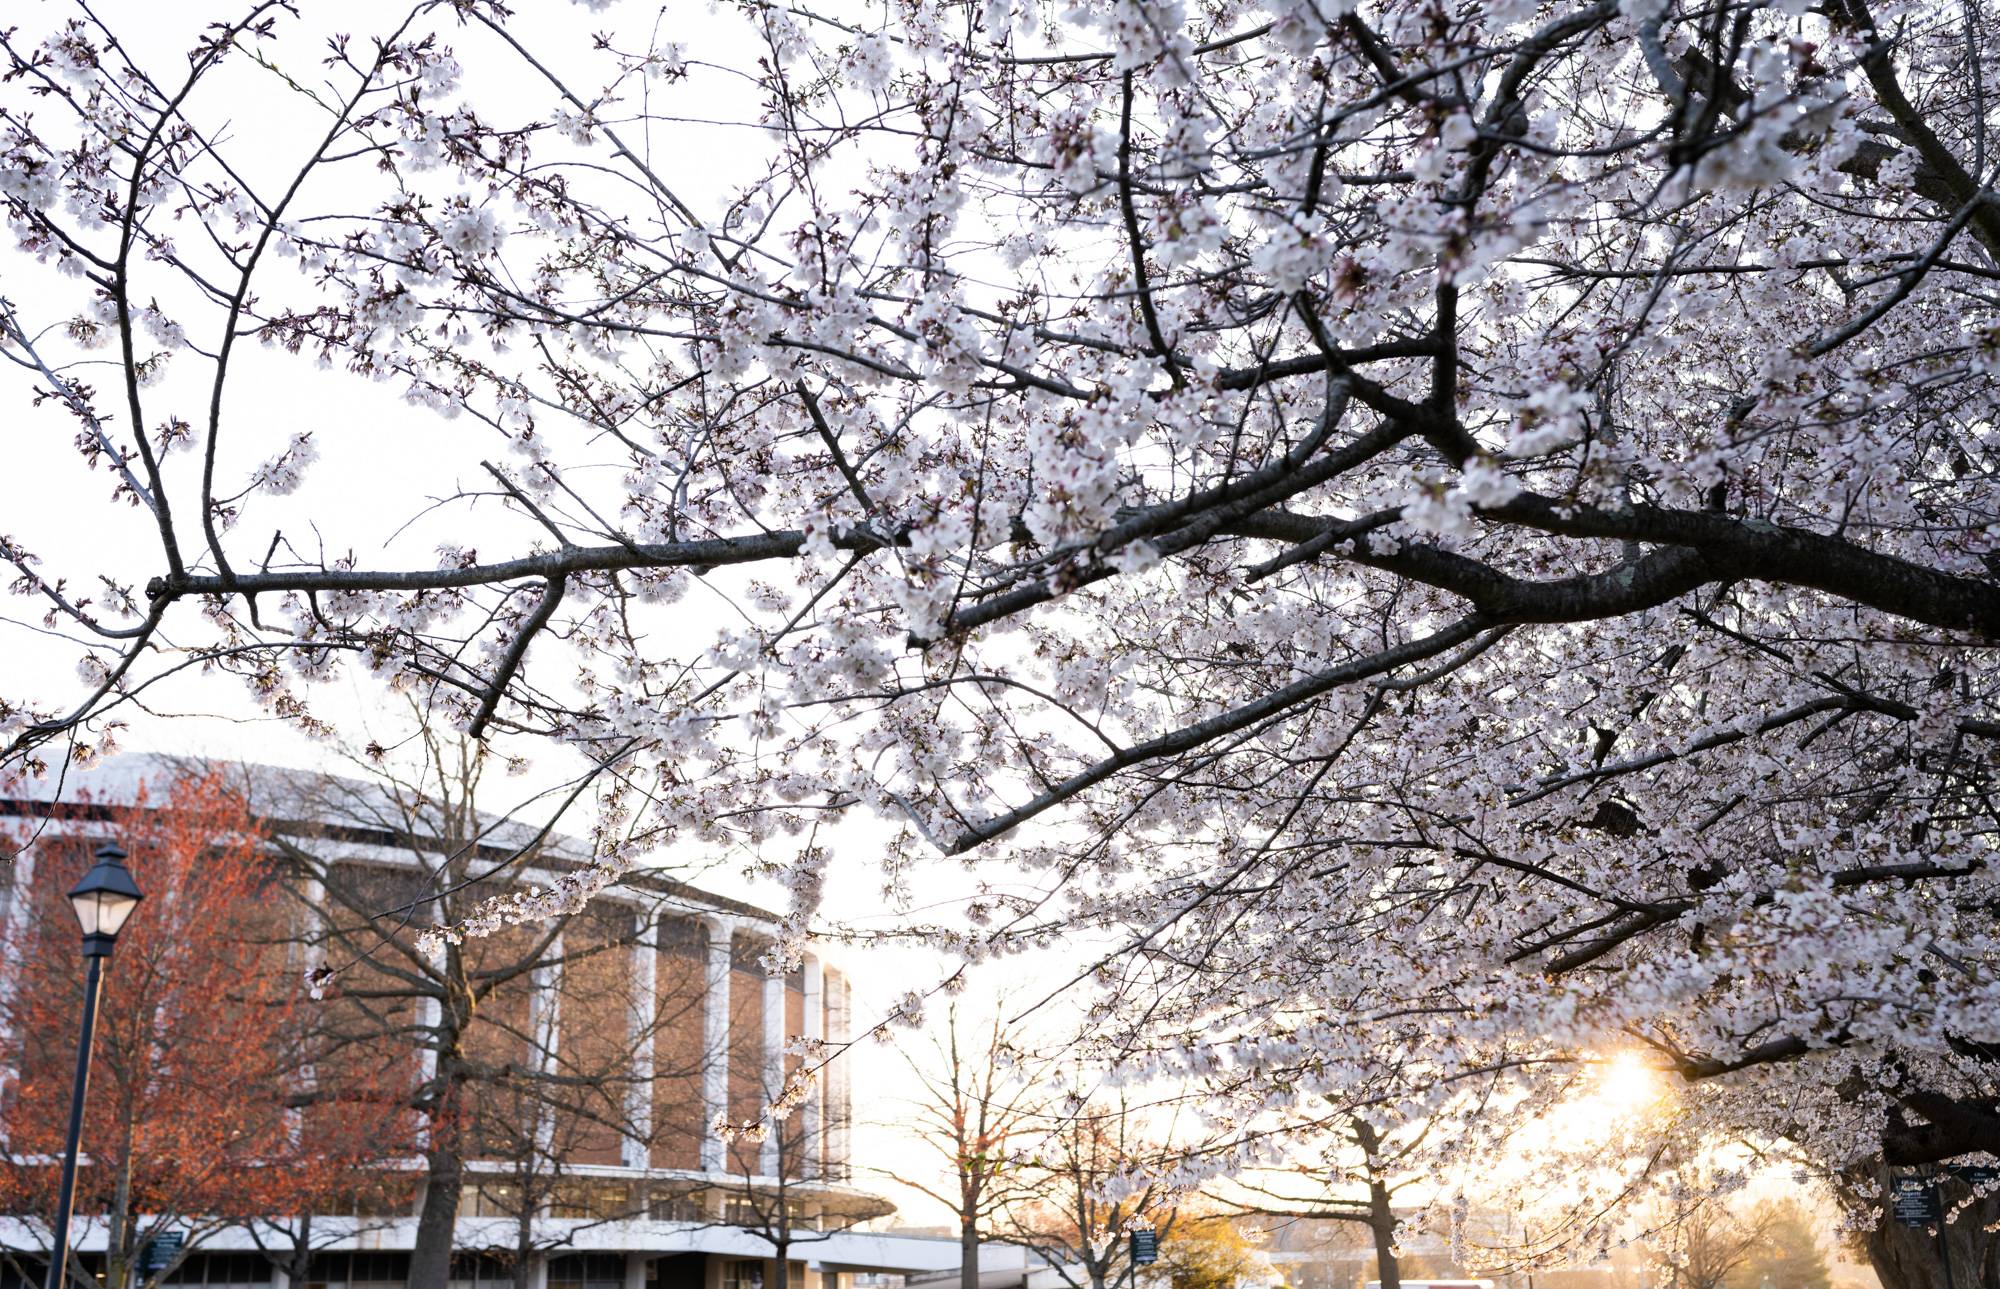 Cherry blossoms in full bloom at sunrise in front of the Convocation Center.